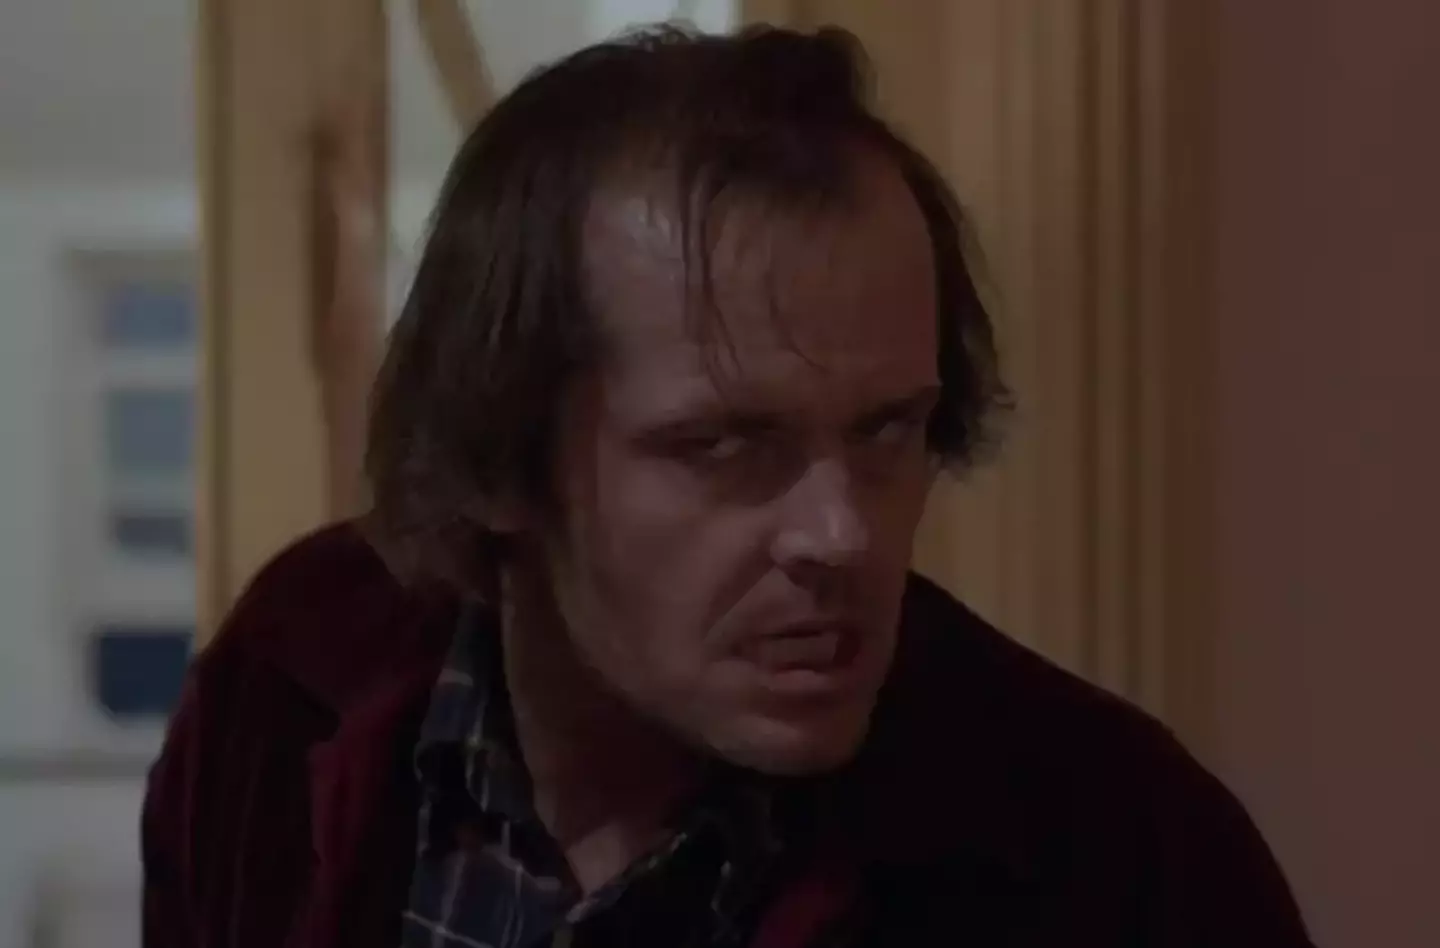 Film director Stanley Kubrick didn’t think Robert De Niro was psychotic enough to star in The Shining.